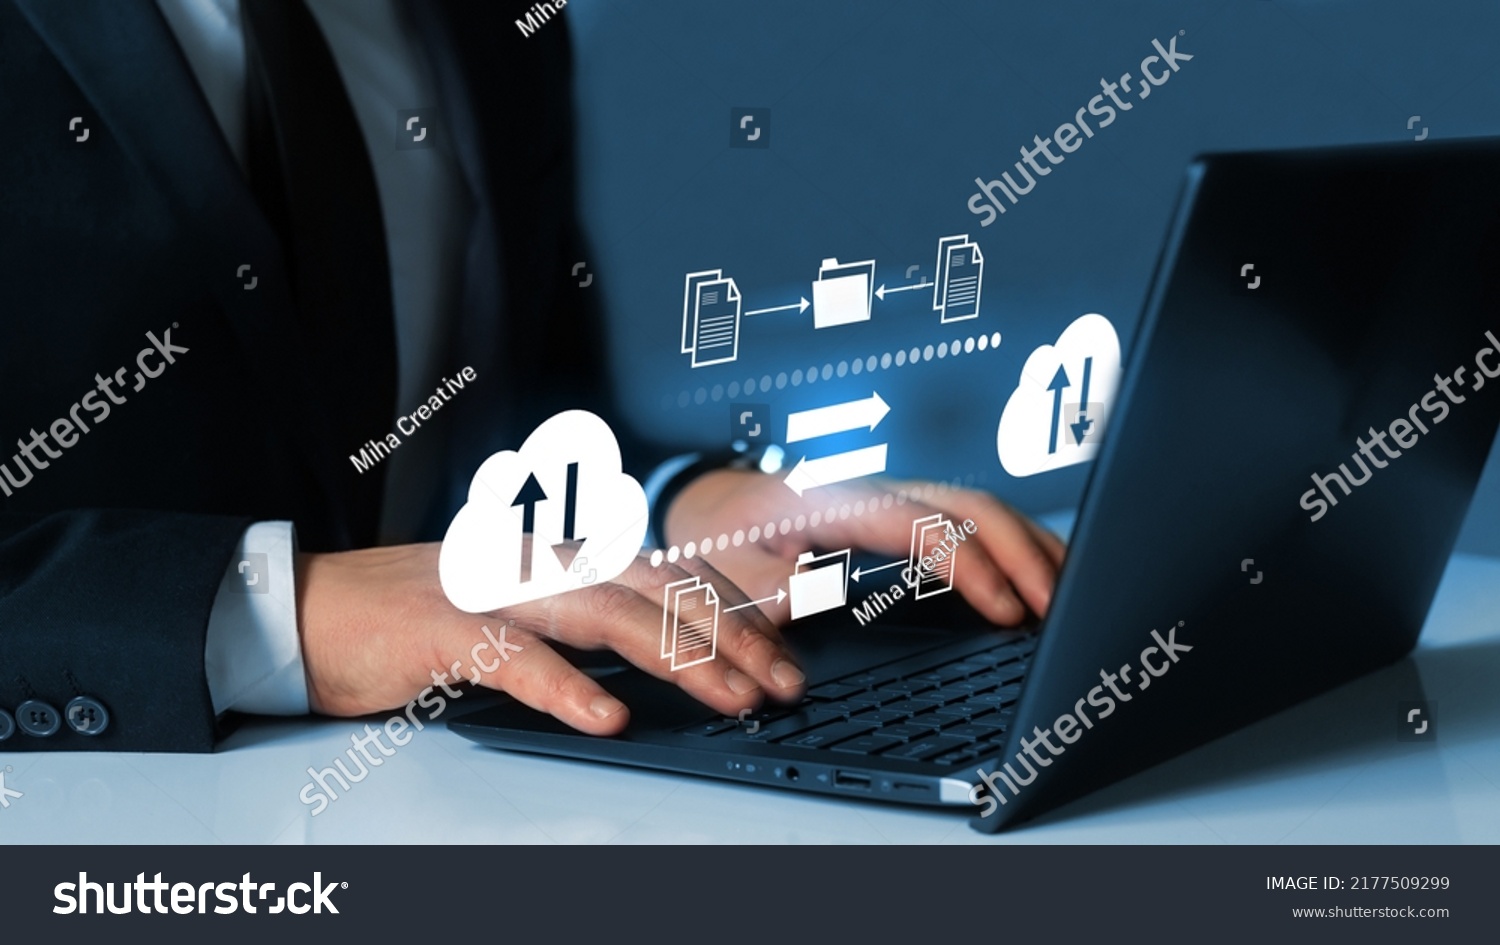 Exchange information and data with internet cloud technology.FTP(File Transfer Protocol) files receiver and computer backup copy. File sharing isometric. Digital system for transferring documents. #2177509299